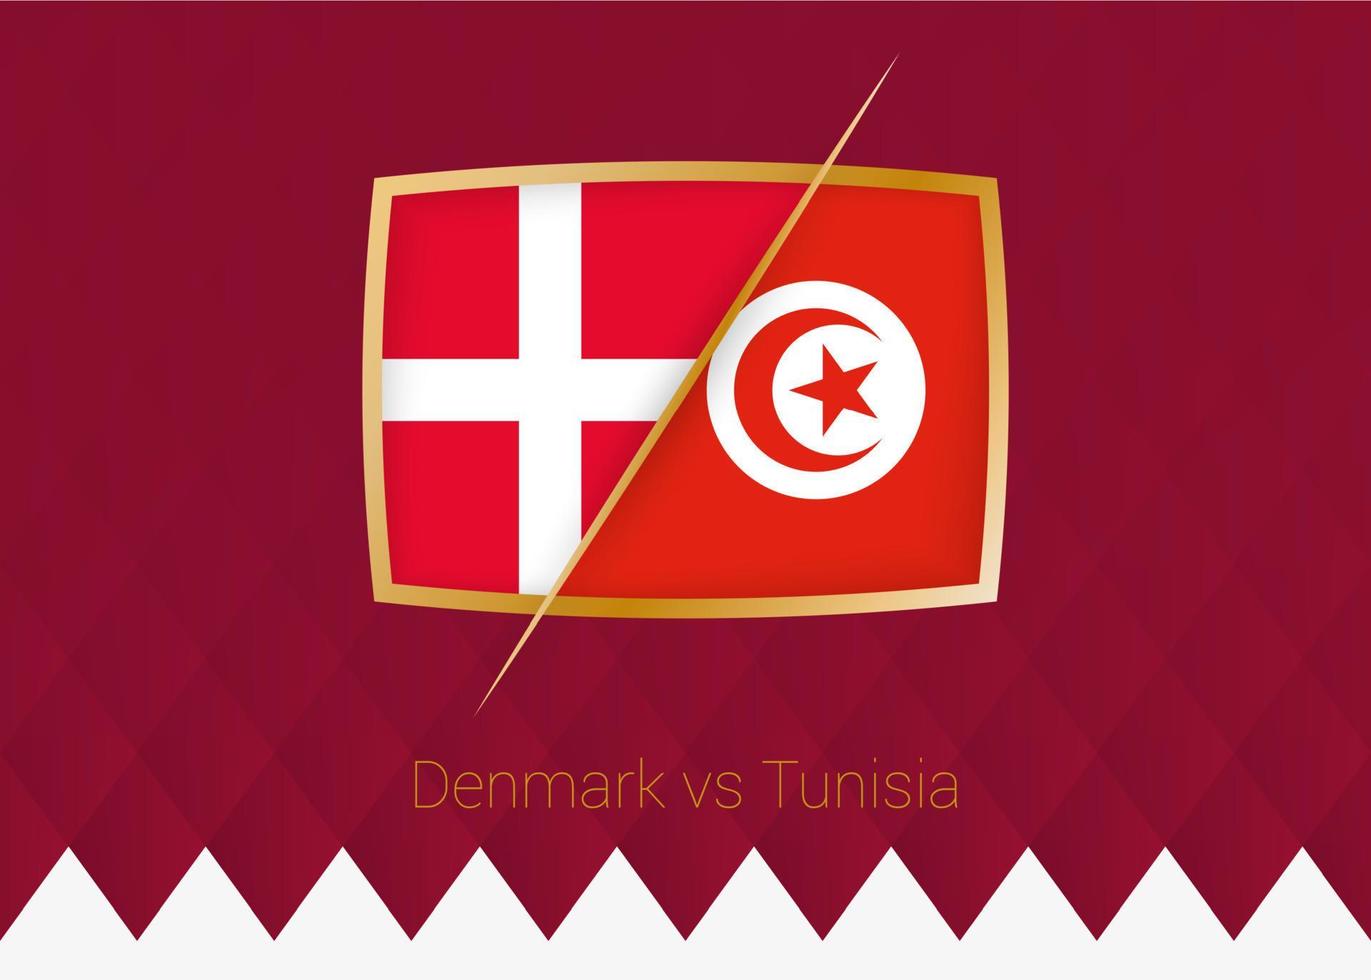 Denmark vs Tunisia, group stage icon of football competition on burgundy background. vector